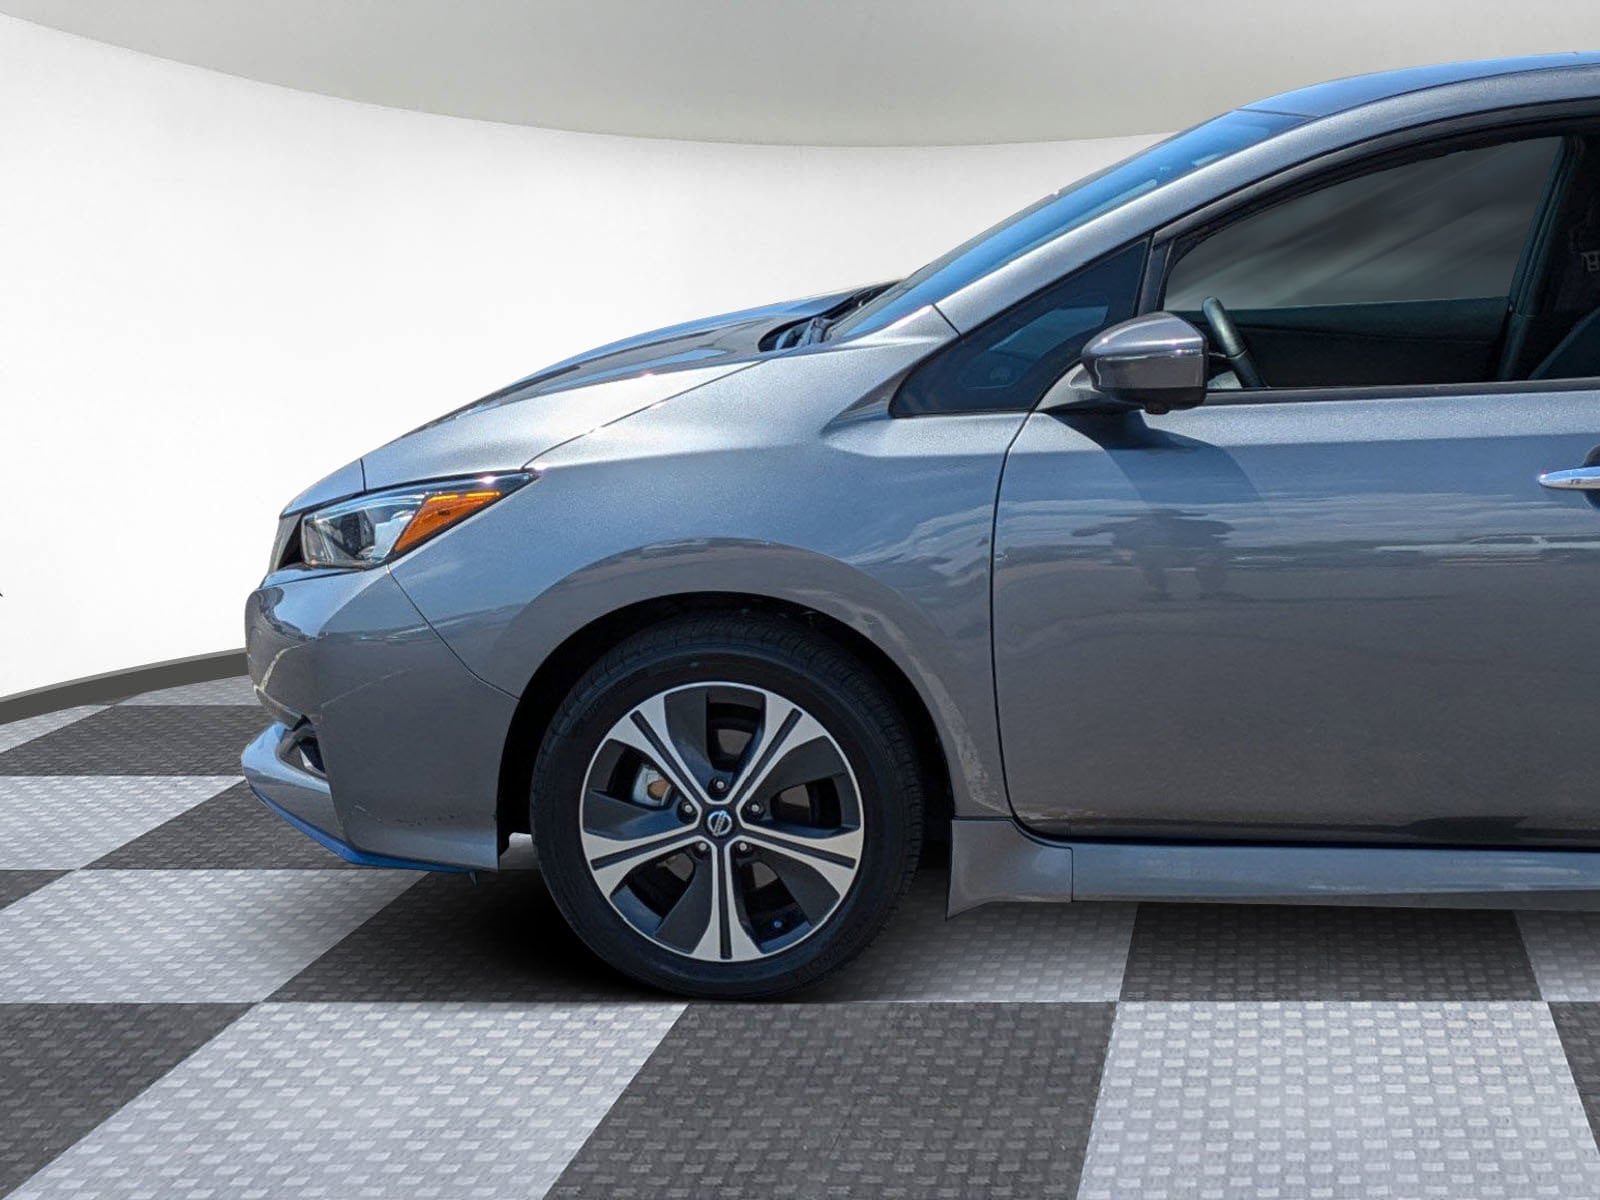 Used 2020 Nissan Leaf SL Plus with VIN 1N4BZ1DP9LC310670 for sale in Avondale, AZ